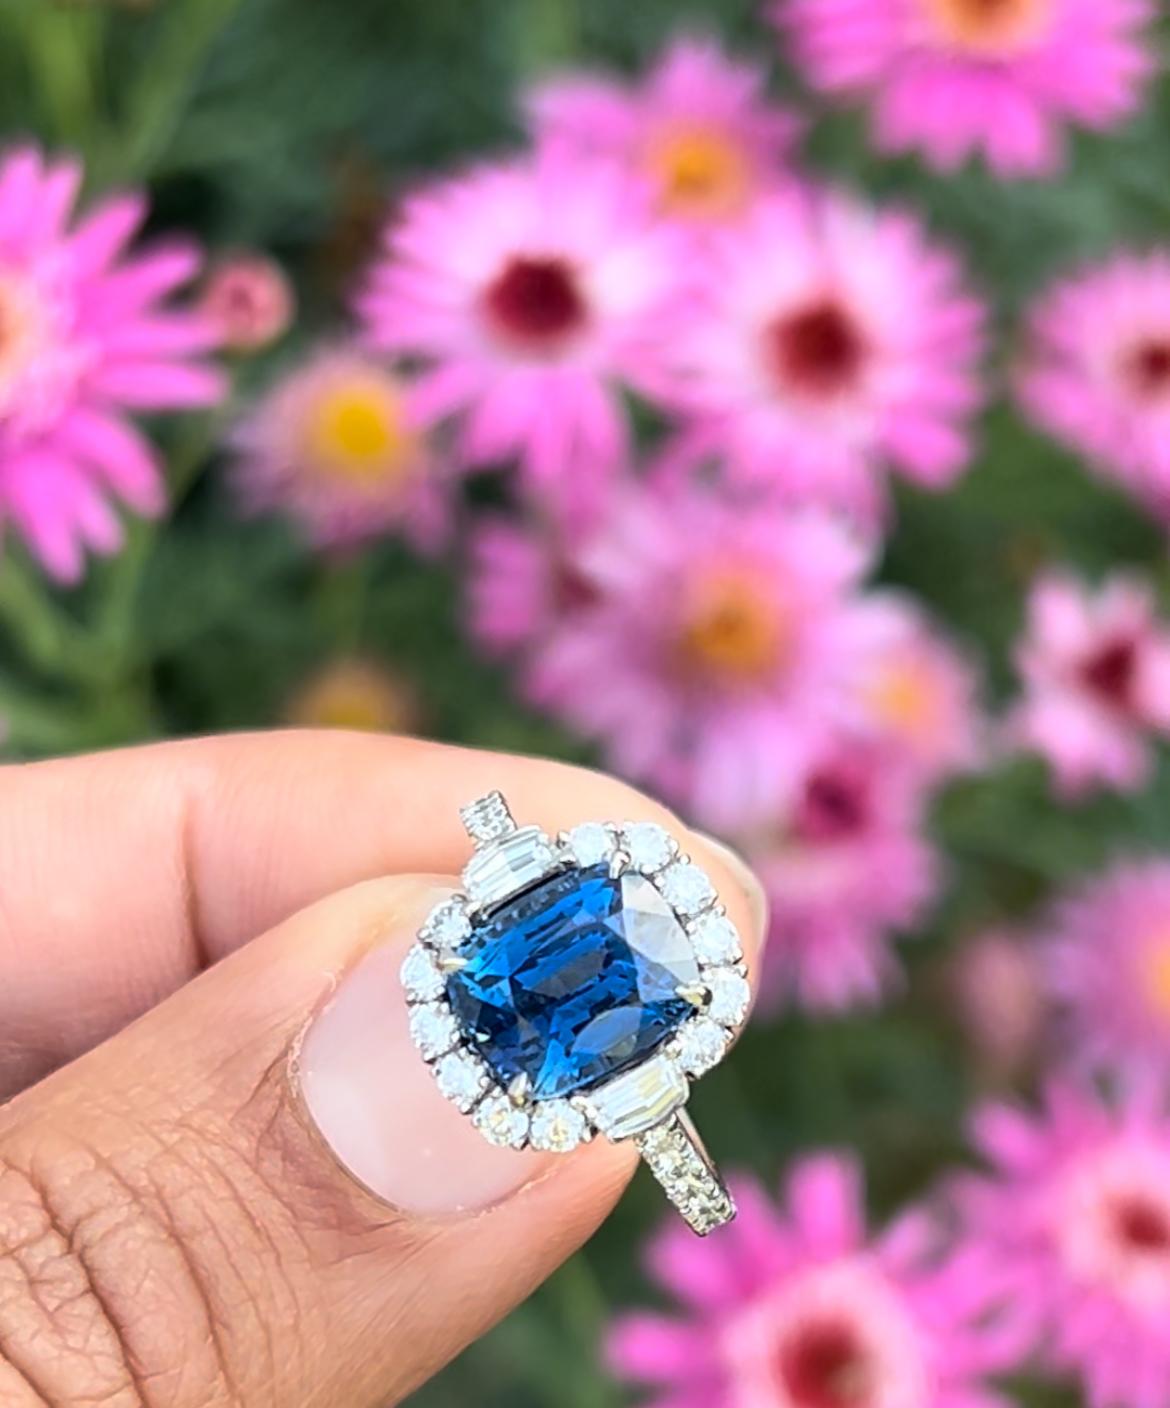 This striking 4.61-carat, untreated cushion-cut GIA certified, Ceylon Sapphire is set between two cadillac-cut and numerous round diamonds in gleaming platinum.

The captivating sapphire displays a beautiful classic blue color which is completely